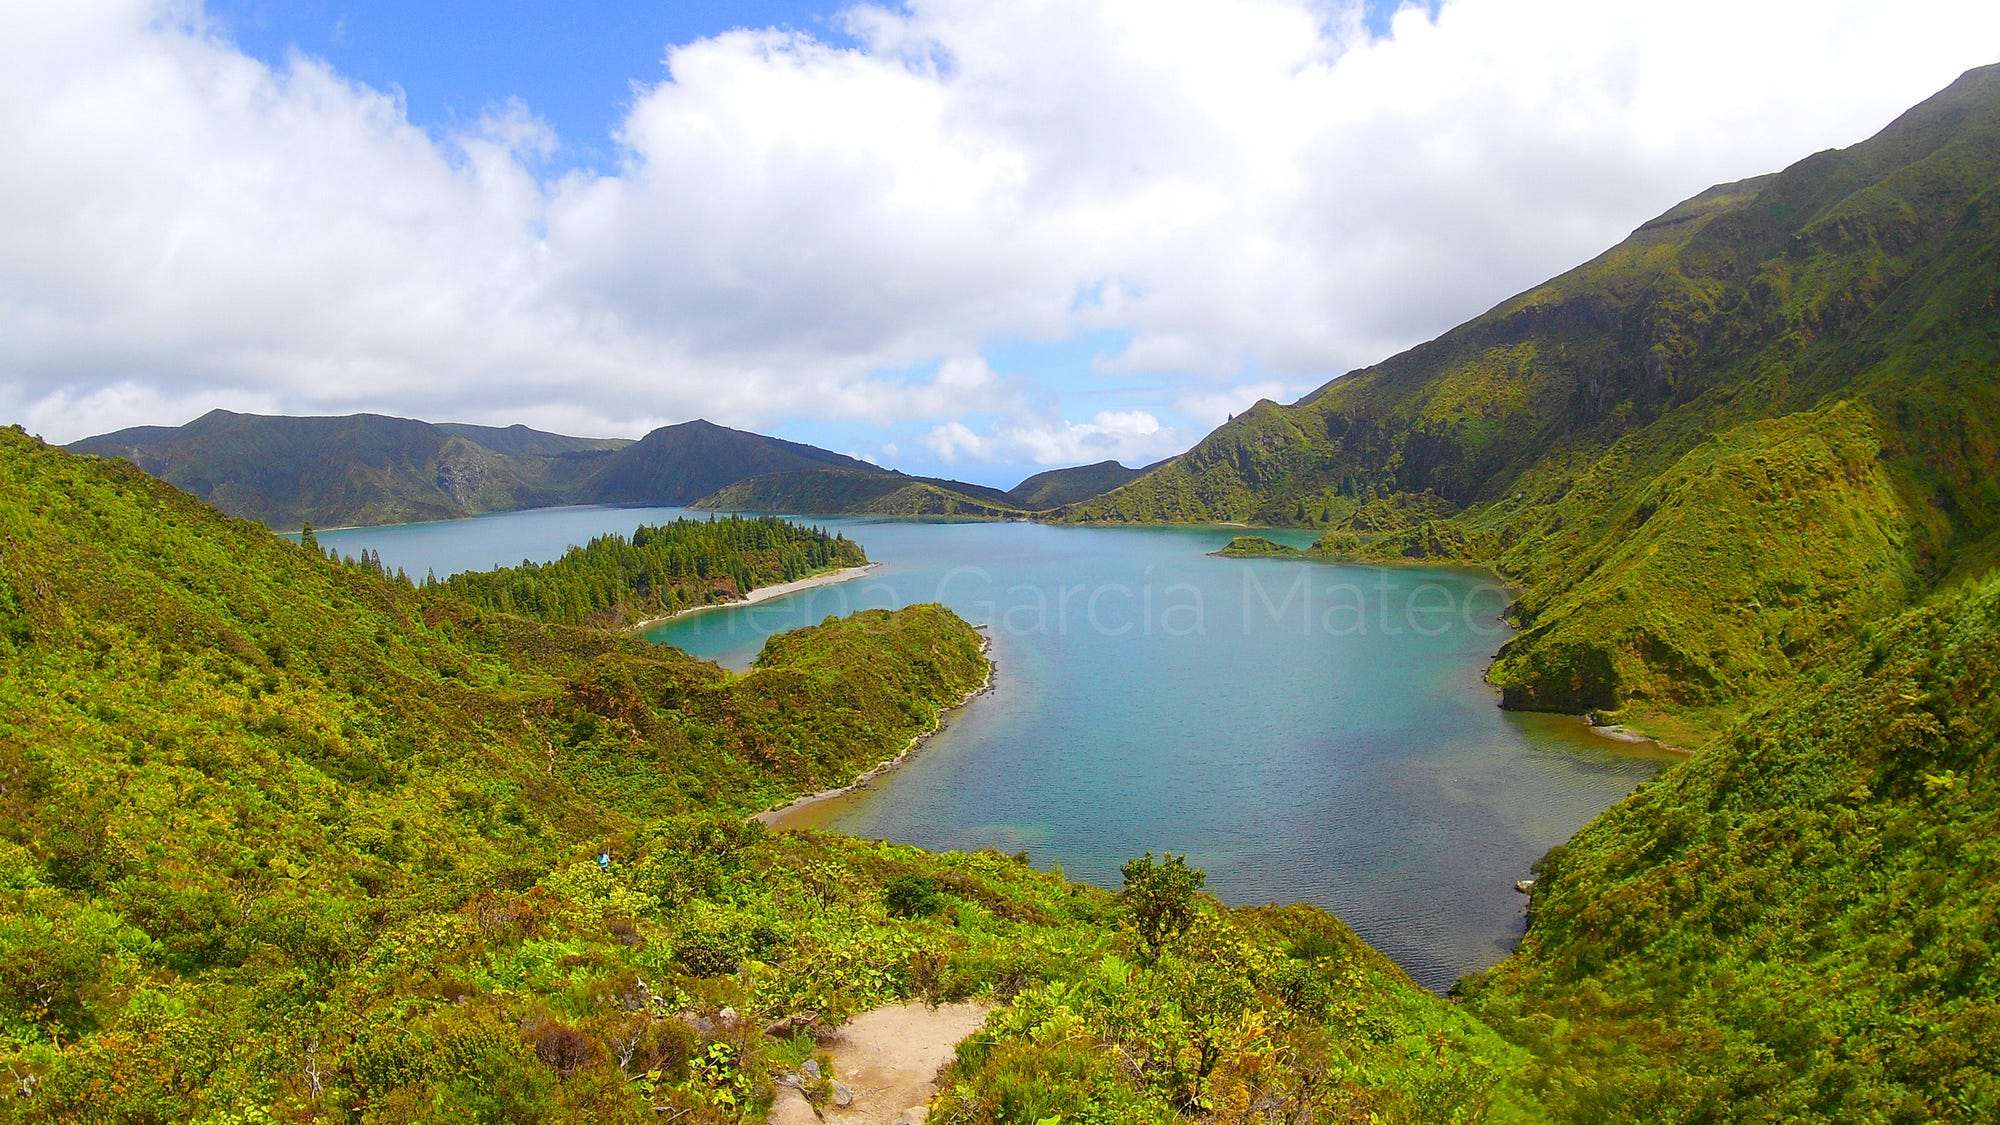 Discovering the Azores: a 7-Day Experience in São Miguel | by Jimena García  Mateo | Wandering Serendipity | Medium